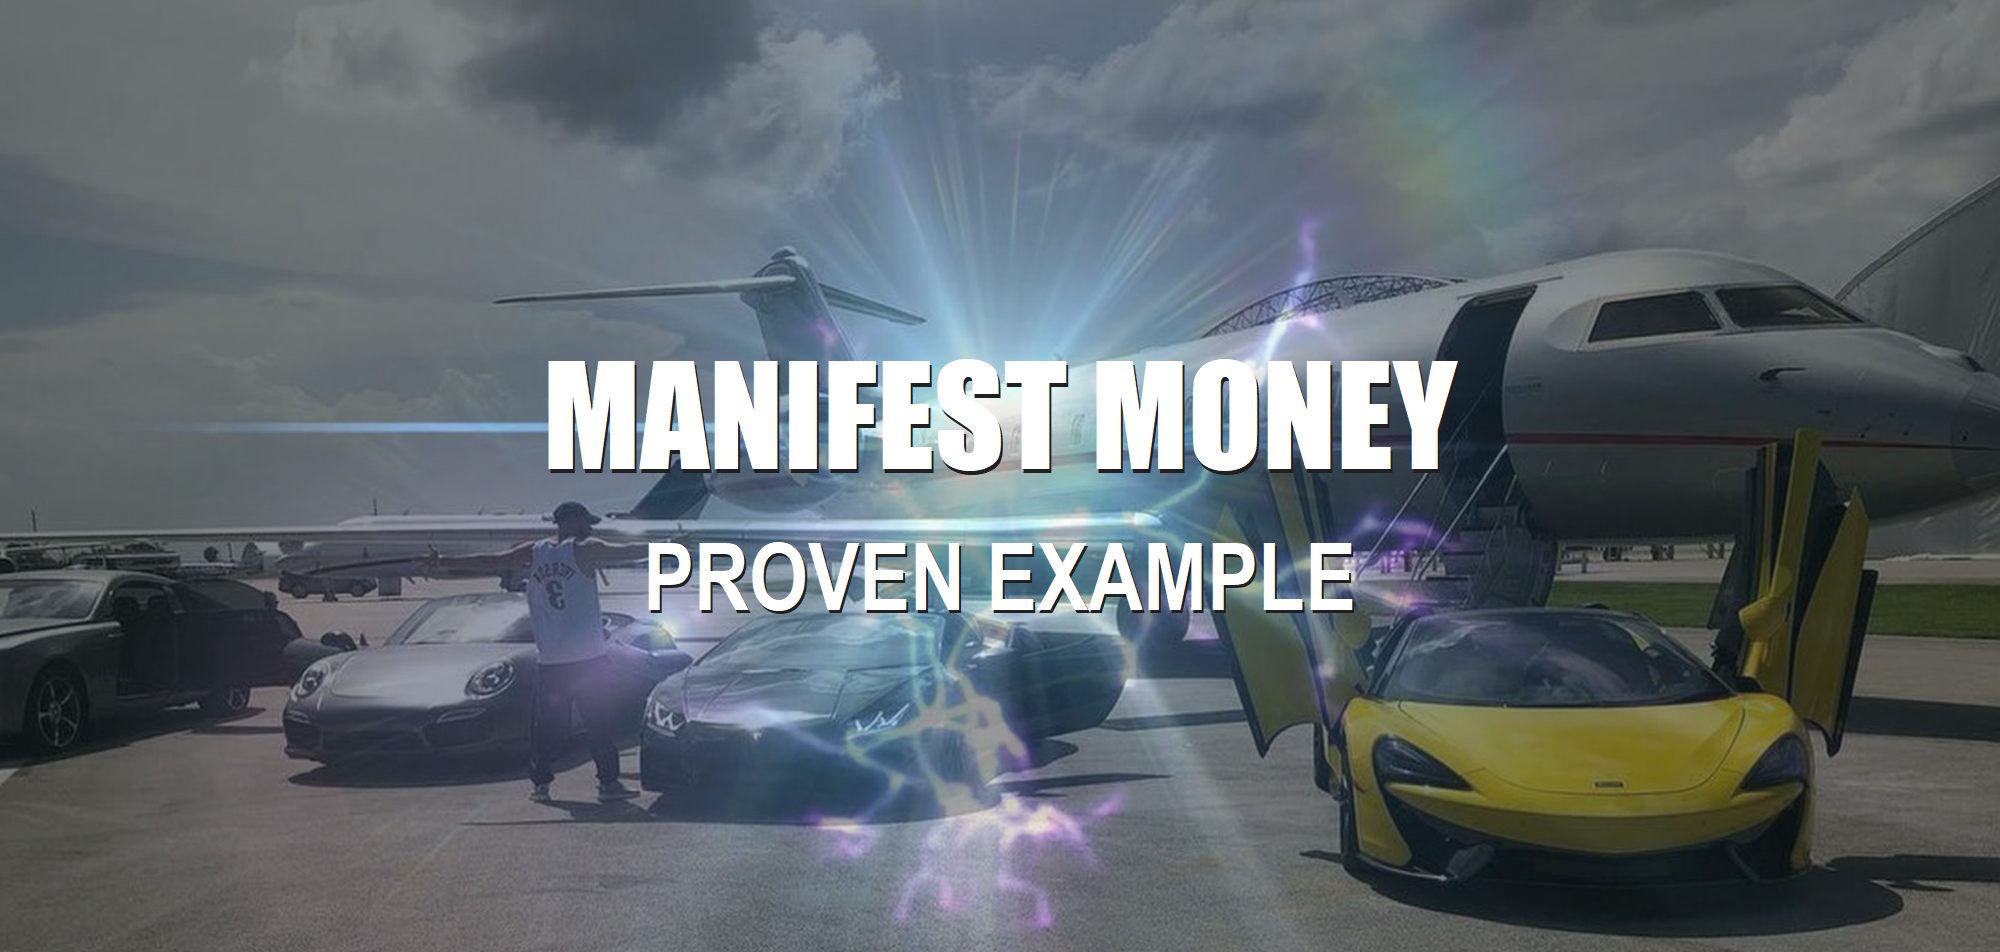 MANIFEST MONEY CASH Proven Example How to Create Success, Money, Fame Wealth fast